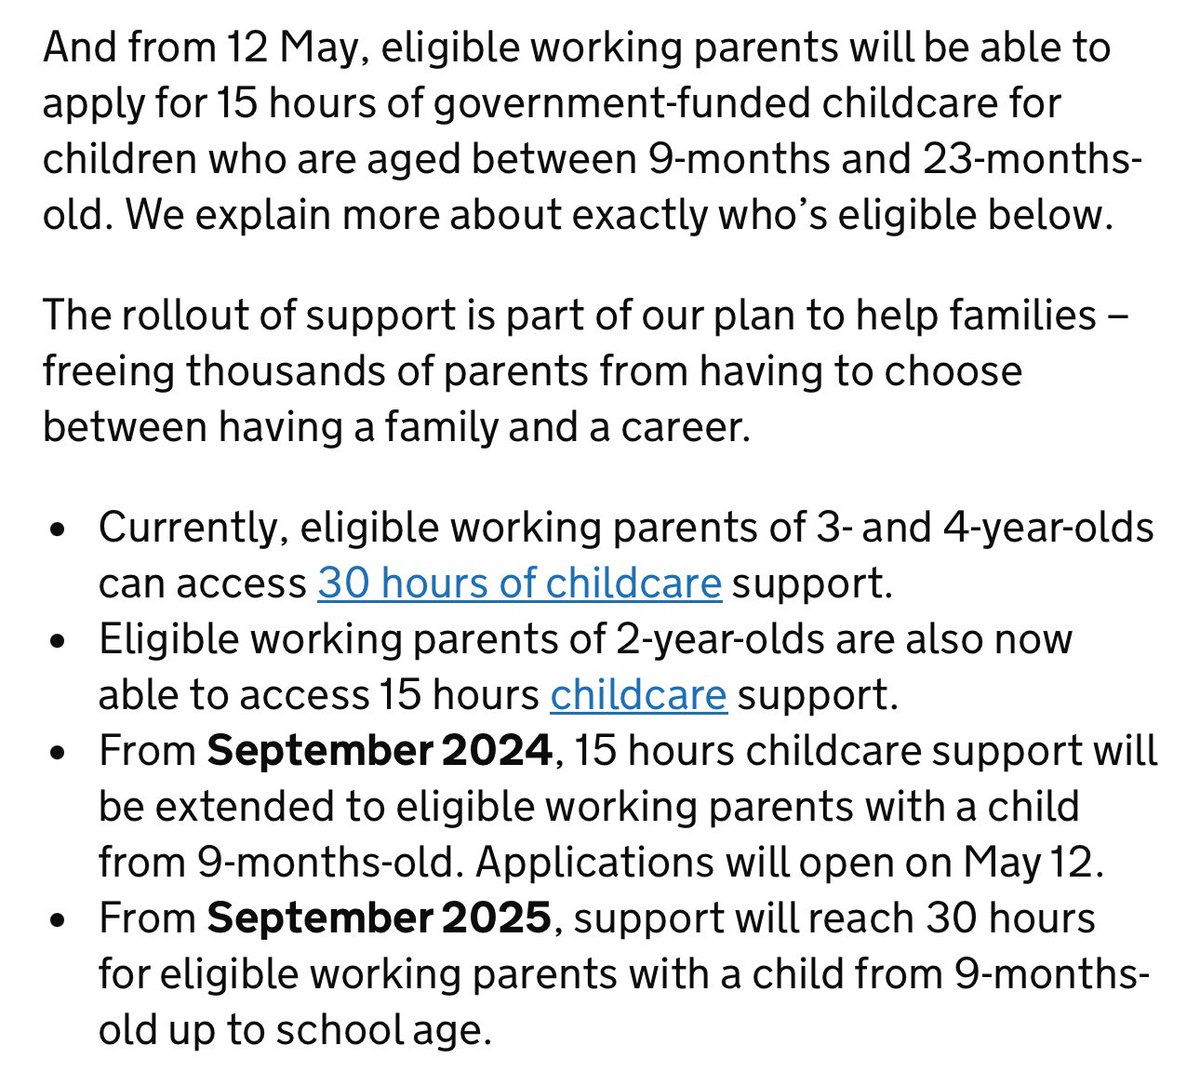 Today in the UK #universalcredit eligibility changes for ppl on minimum wage. You must now work 18hours a week.

- Free childcare is still 15hours/week
- Weekend/part-time jobs usually 7.5/8 hour shifts (~16 hours total)

So fuck parents, carers & the disabled, yes, @RishiSunak?